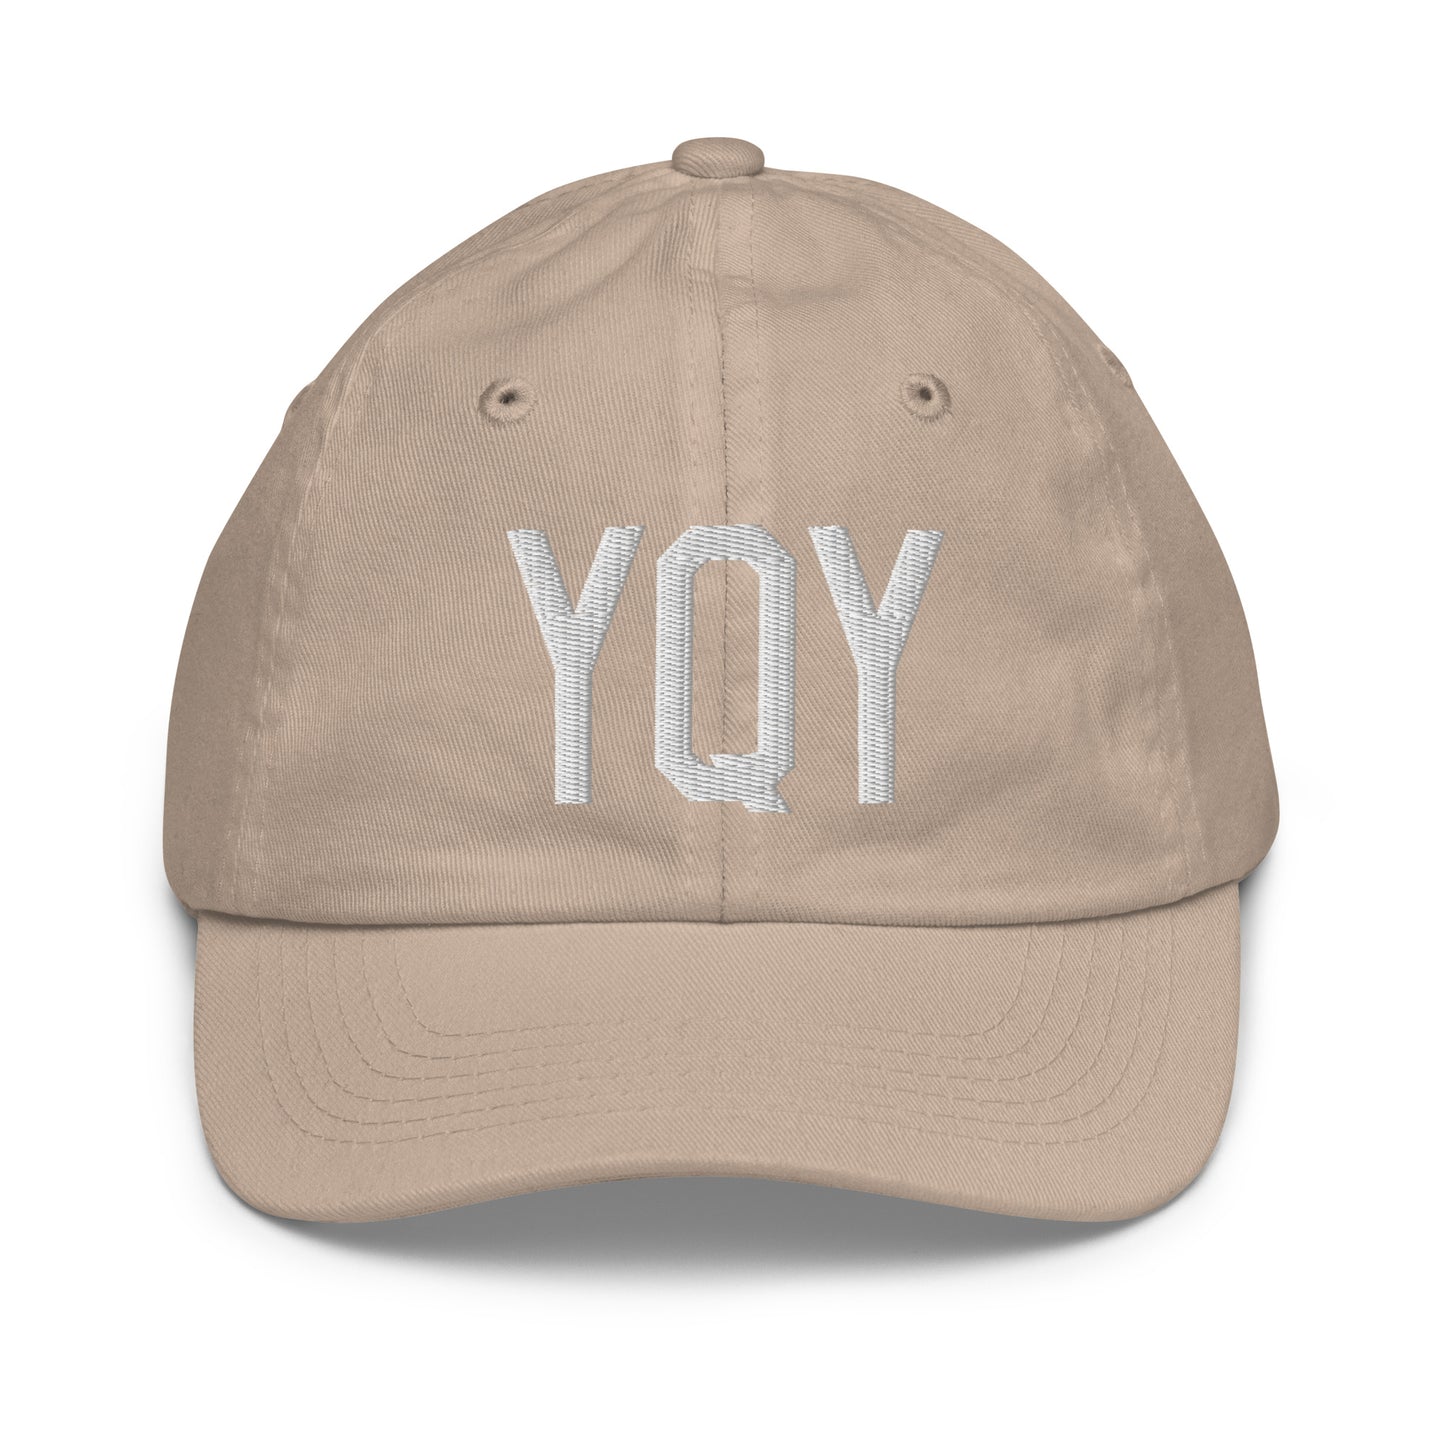 Airport Code Kid's Baseball Cap - White • YQY Sydney • YHM Designs - Image 28